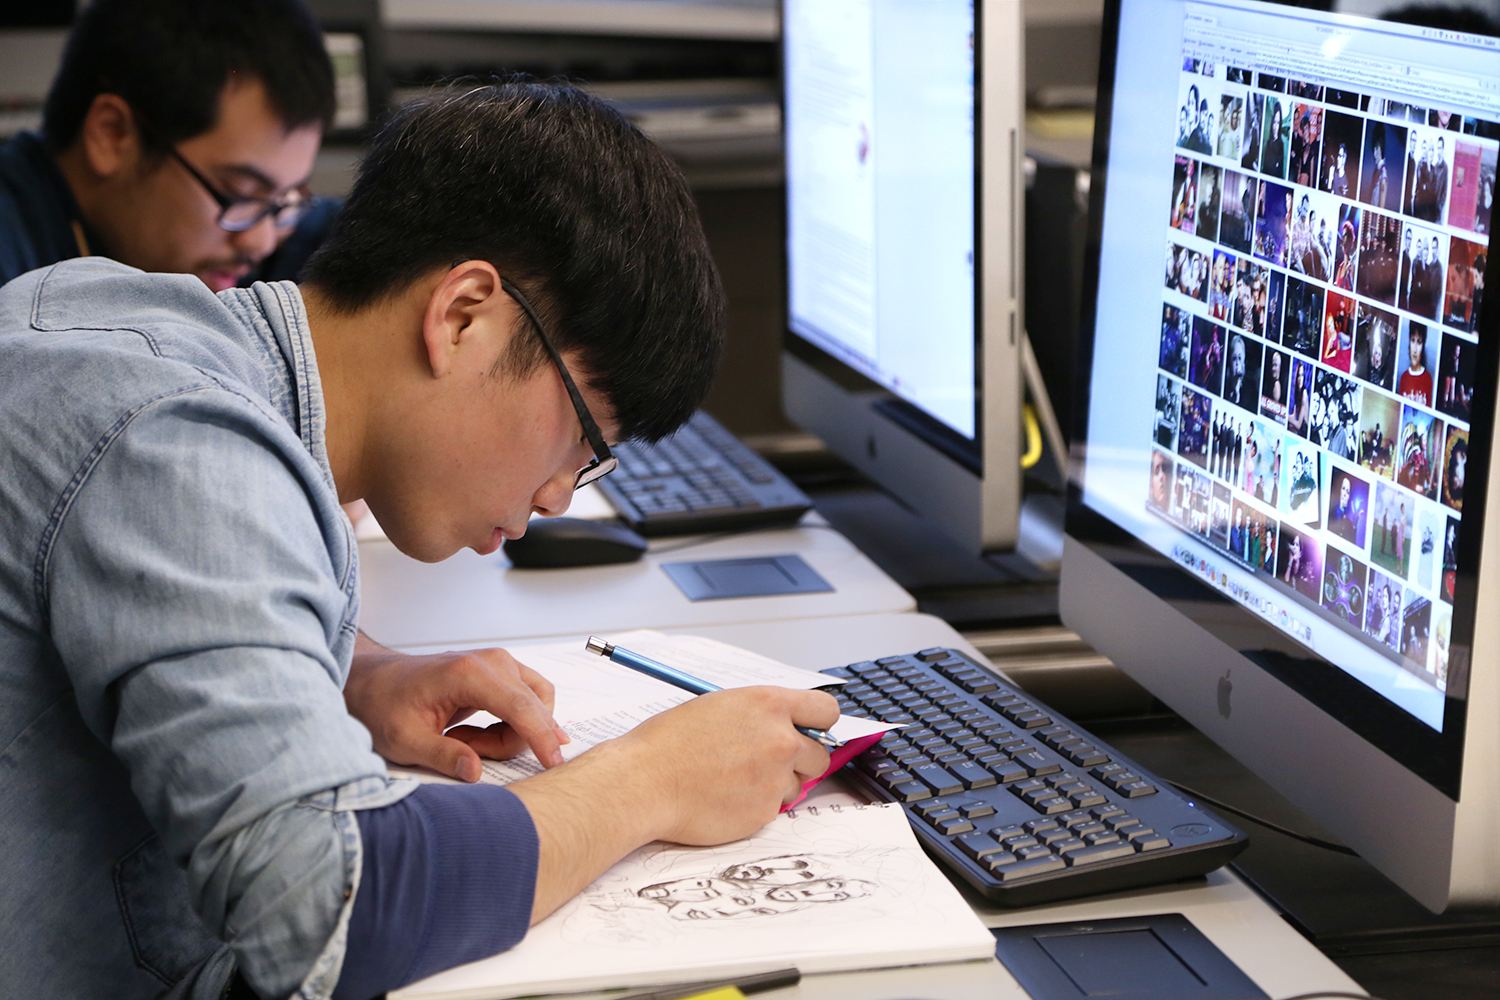 Students work in a graphic design class.